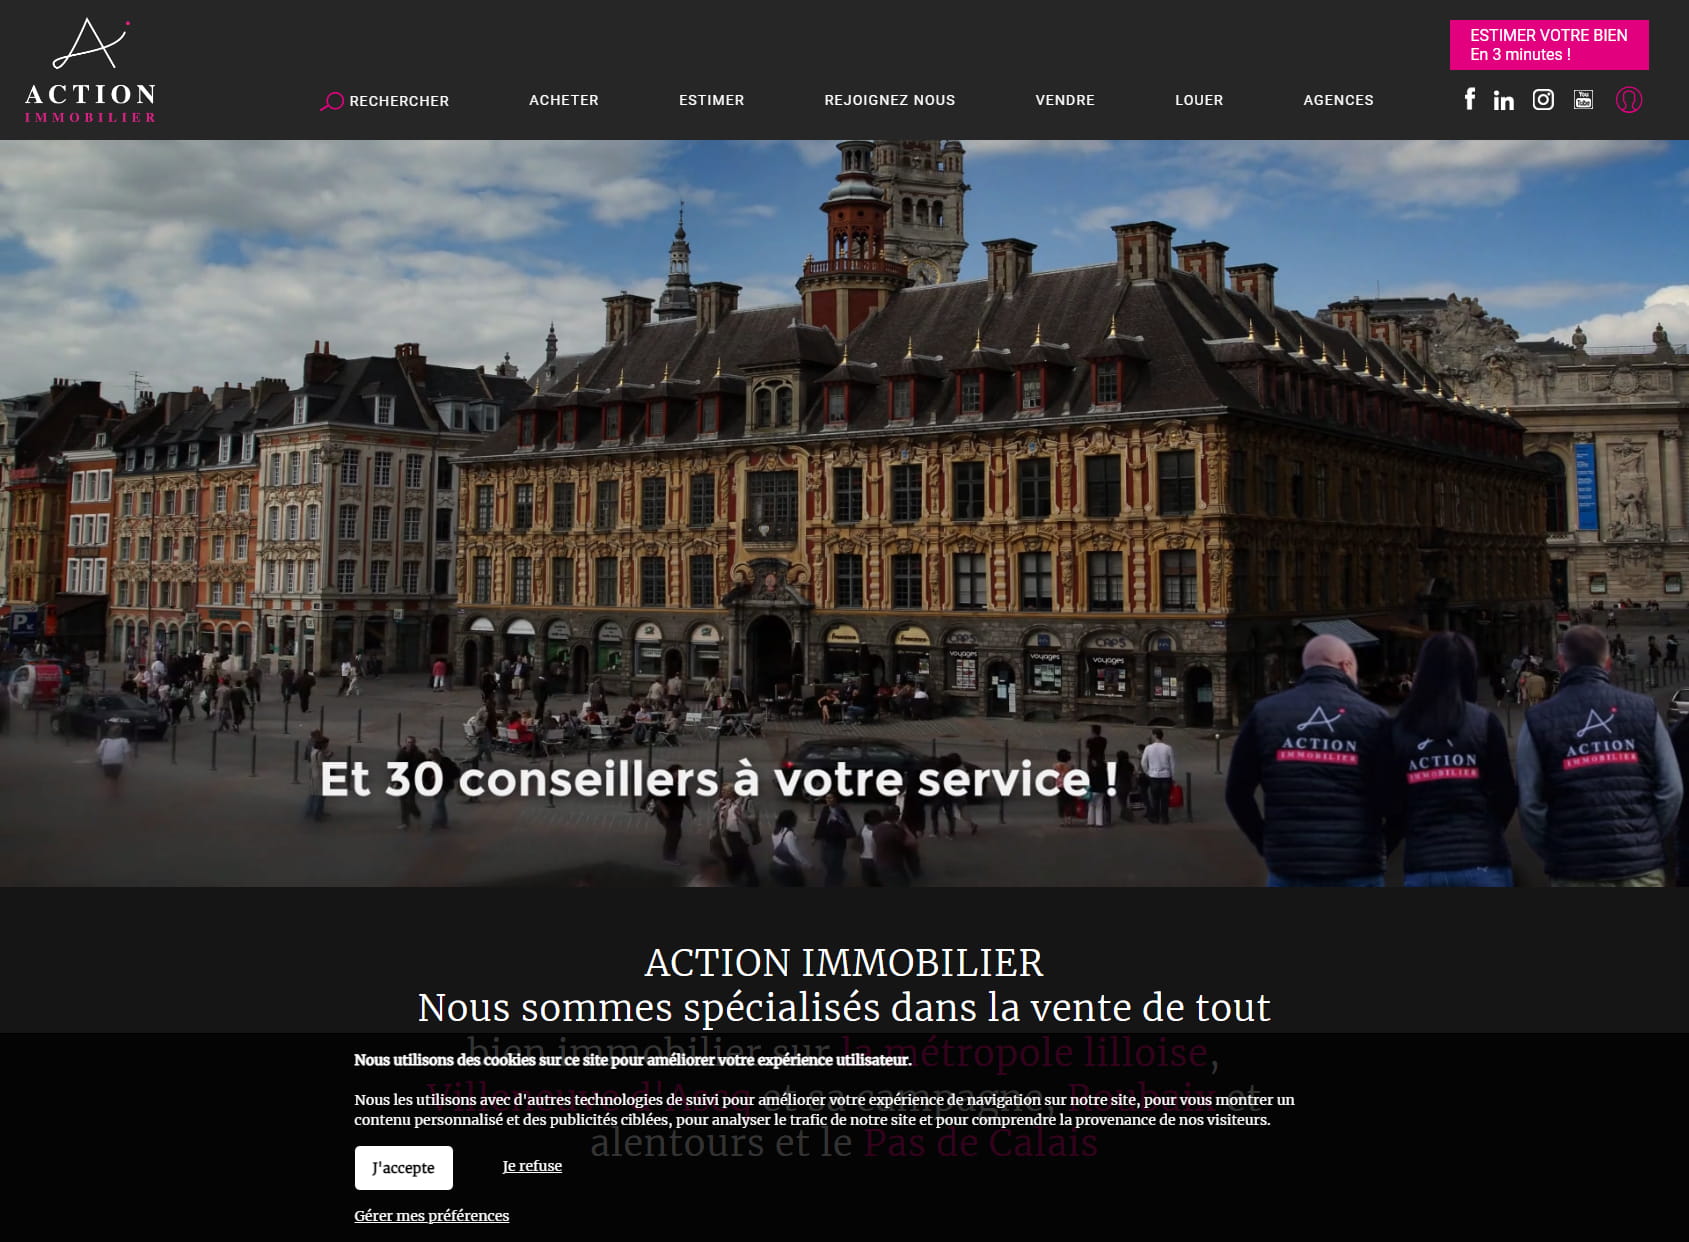 ACTION Immobilier